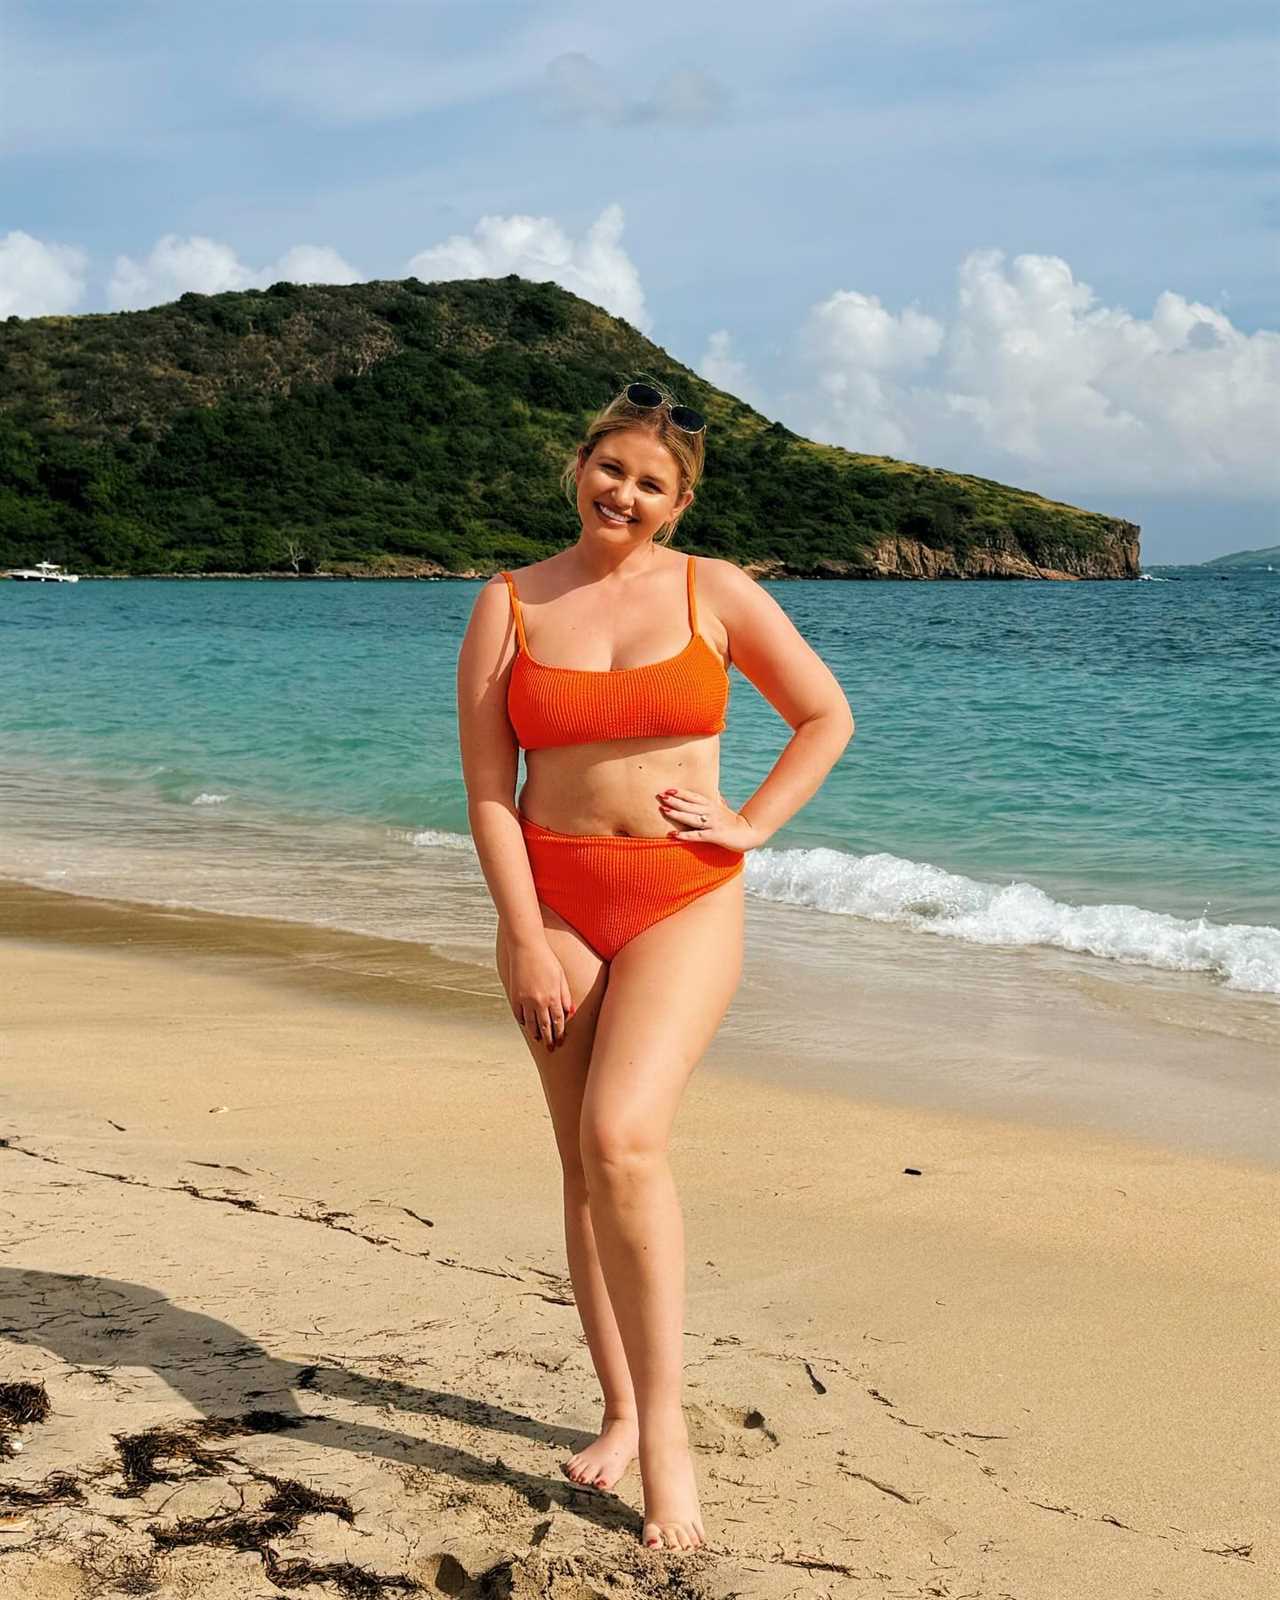 Love Island's Amy Hart praised for embracing her 'real' body and using her baby as a prop